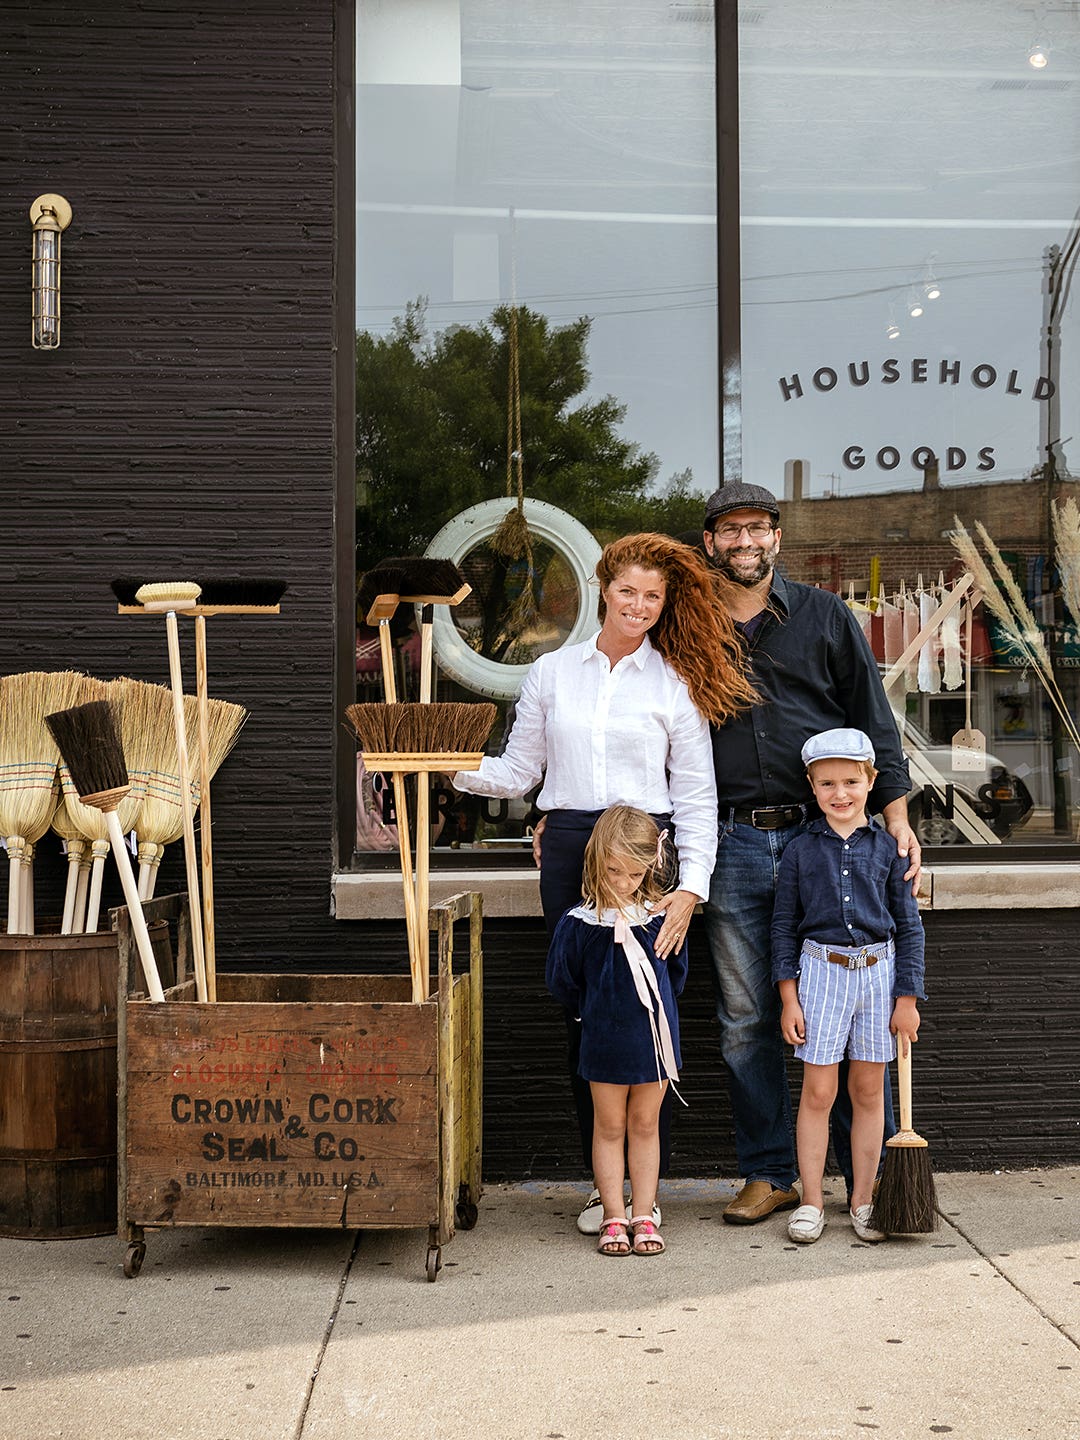 An Abandoned Dentist’s Office Is Now Chicago’s Hottest Housewares Shop